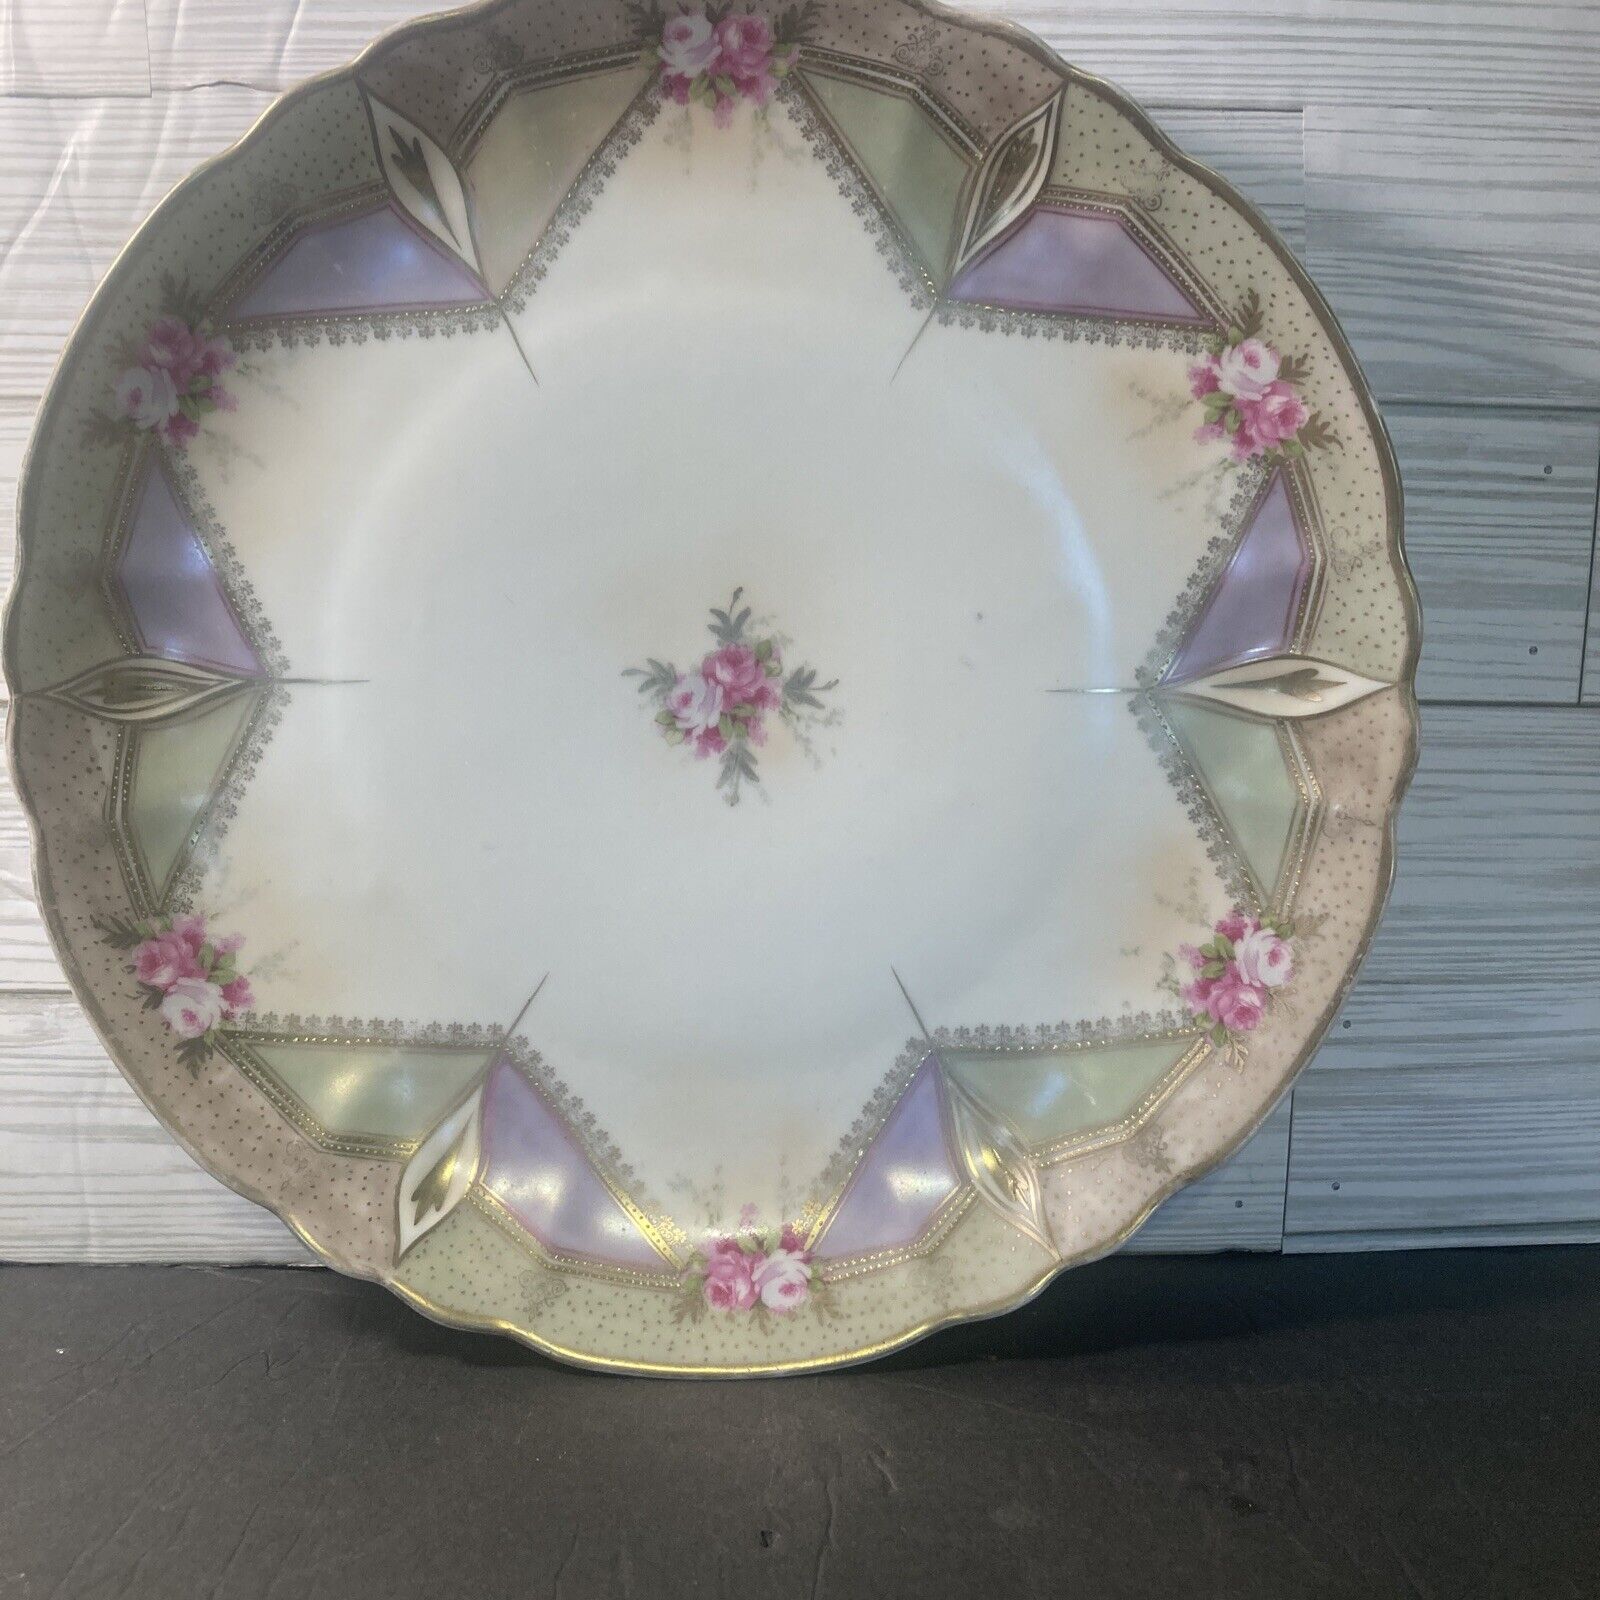 Judaica Star of David Plate w/Gold Paint and Roses - Unique Floral Cottage Core